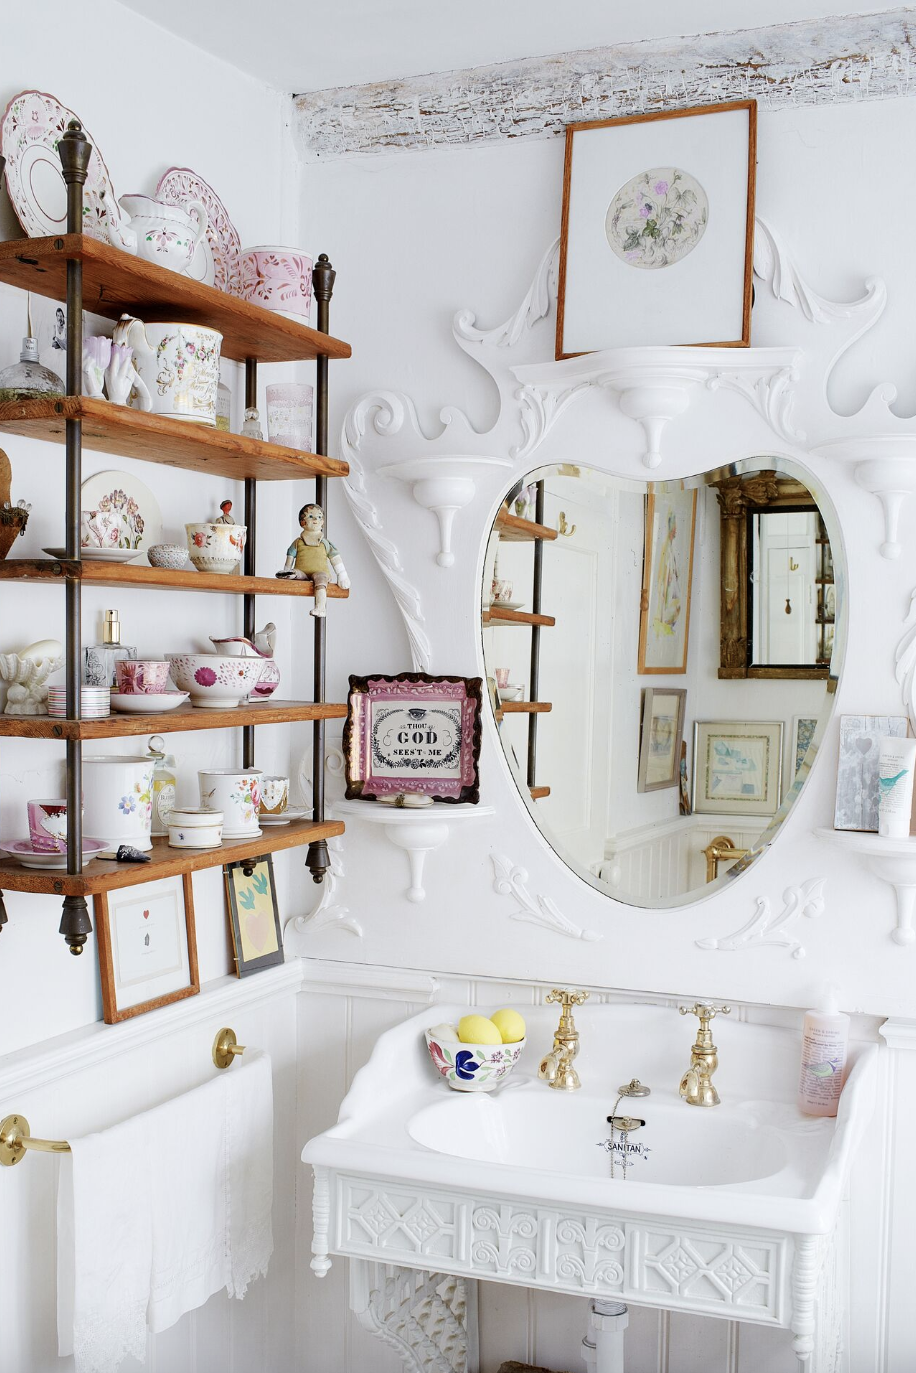 12 Top His and Her's Bathroom Decor Ideas You'll Love to Try